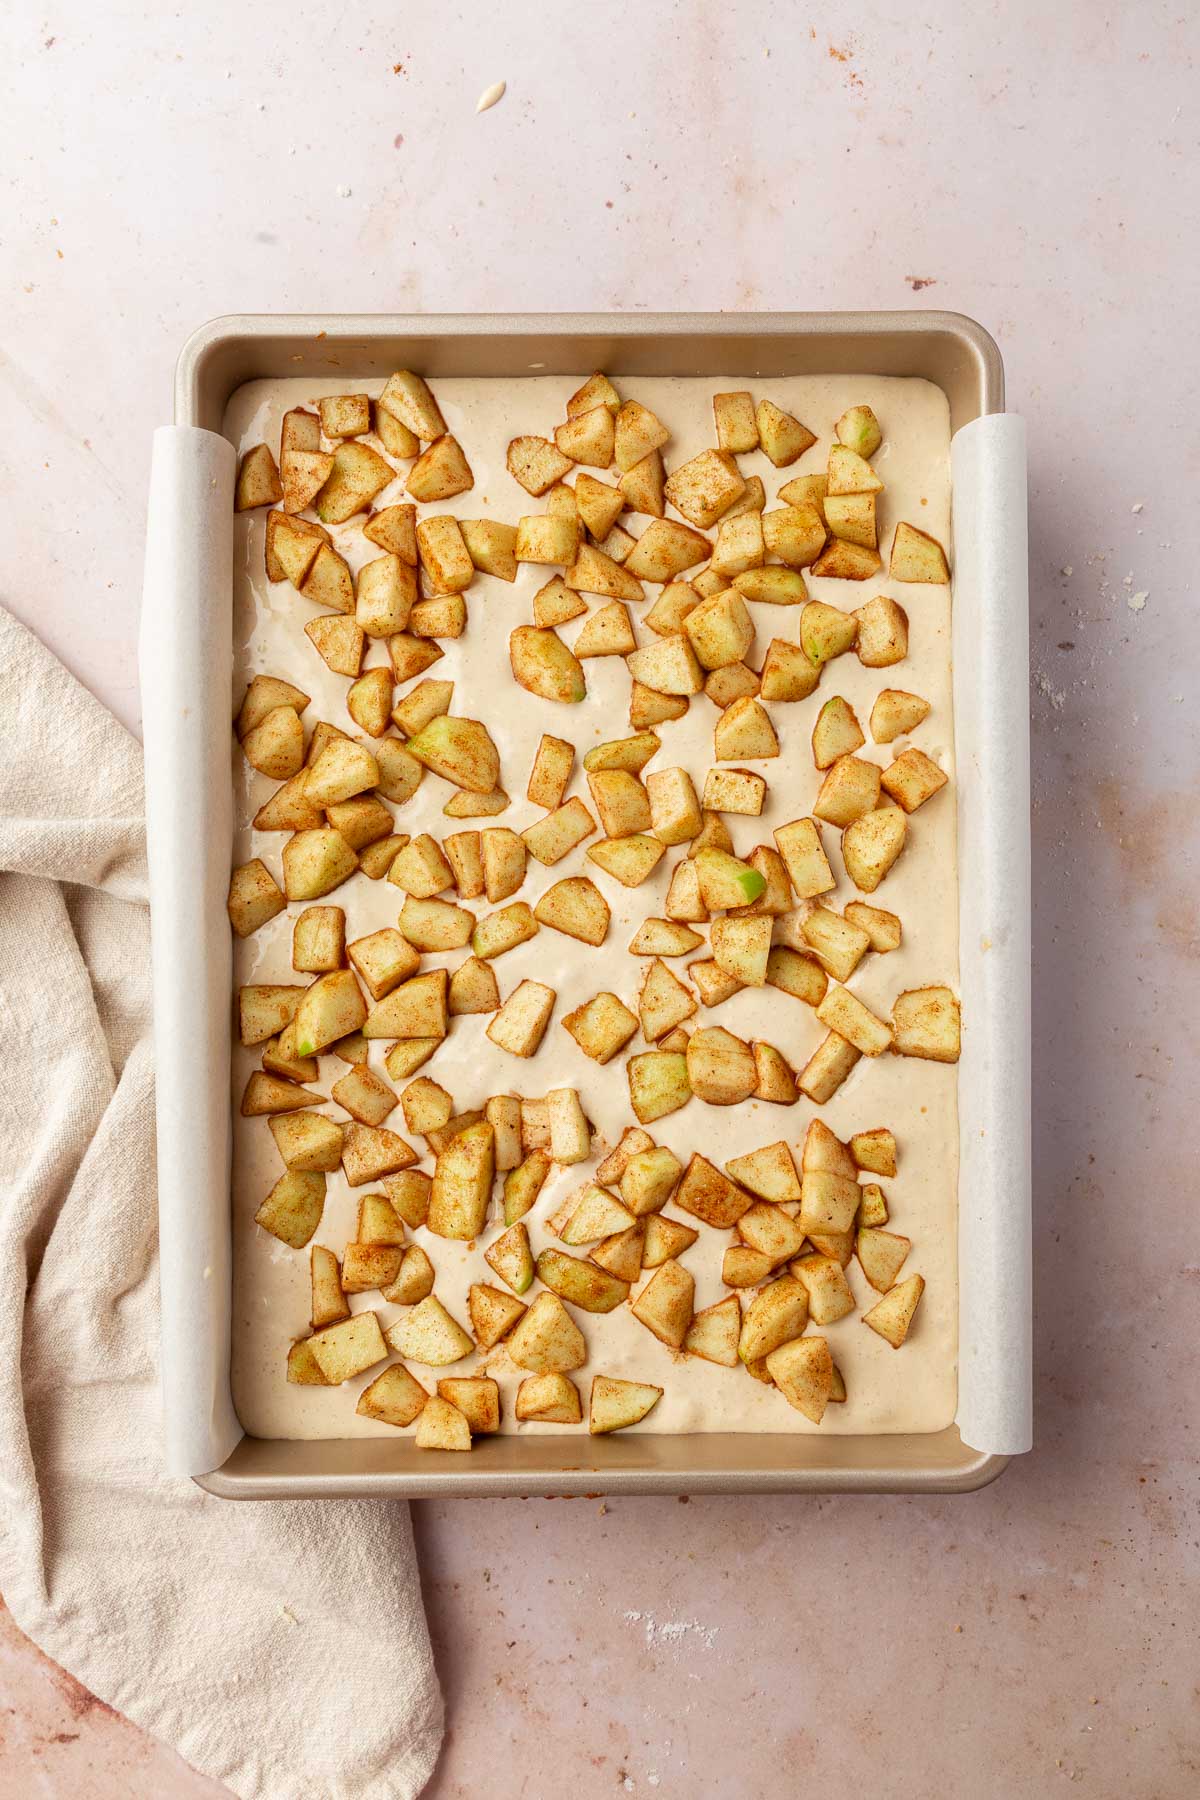 A rectangular baking pan filled with a cheesecake mixture topped with cinnamon spiced apple chunks before baking in the oven.